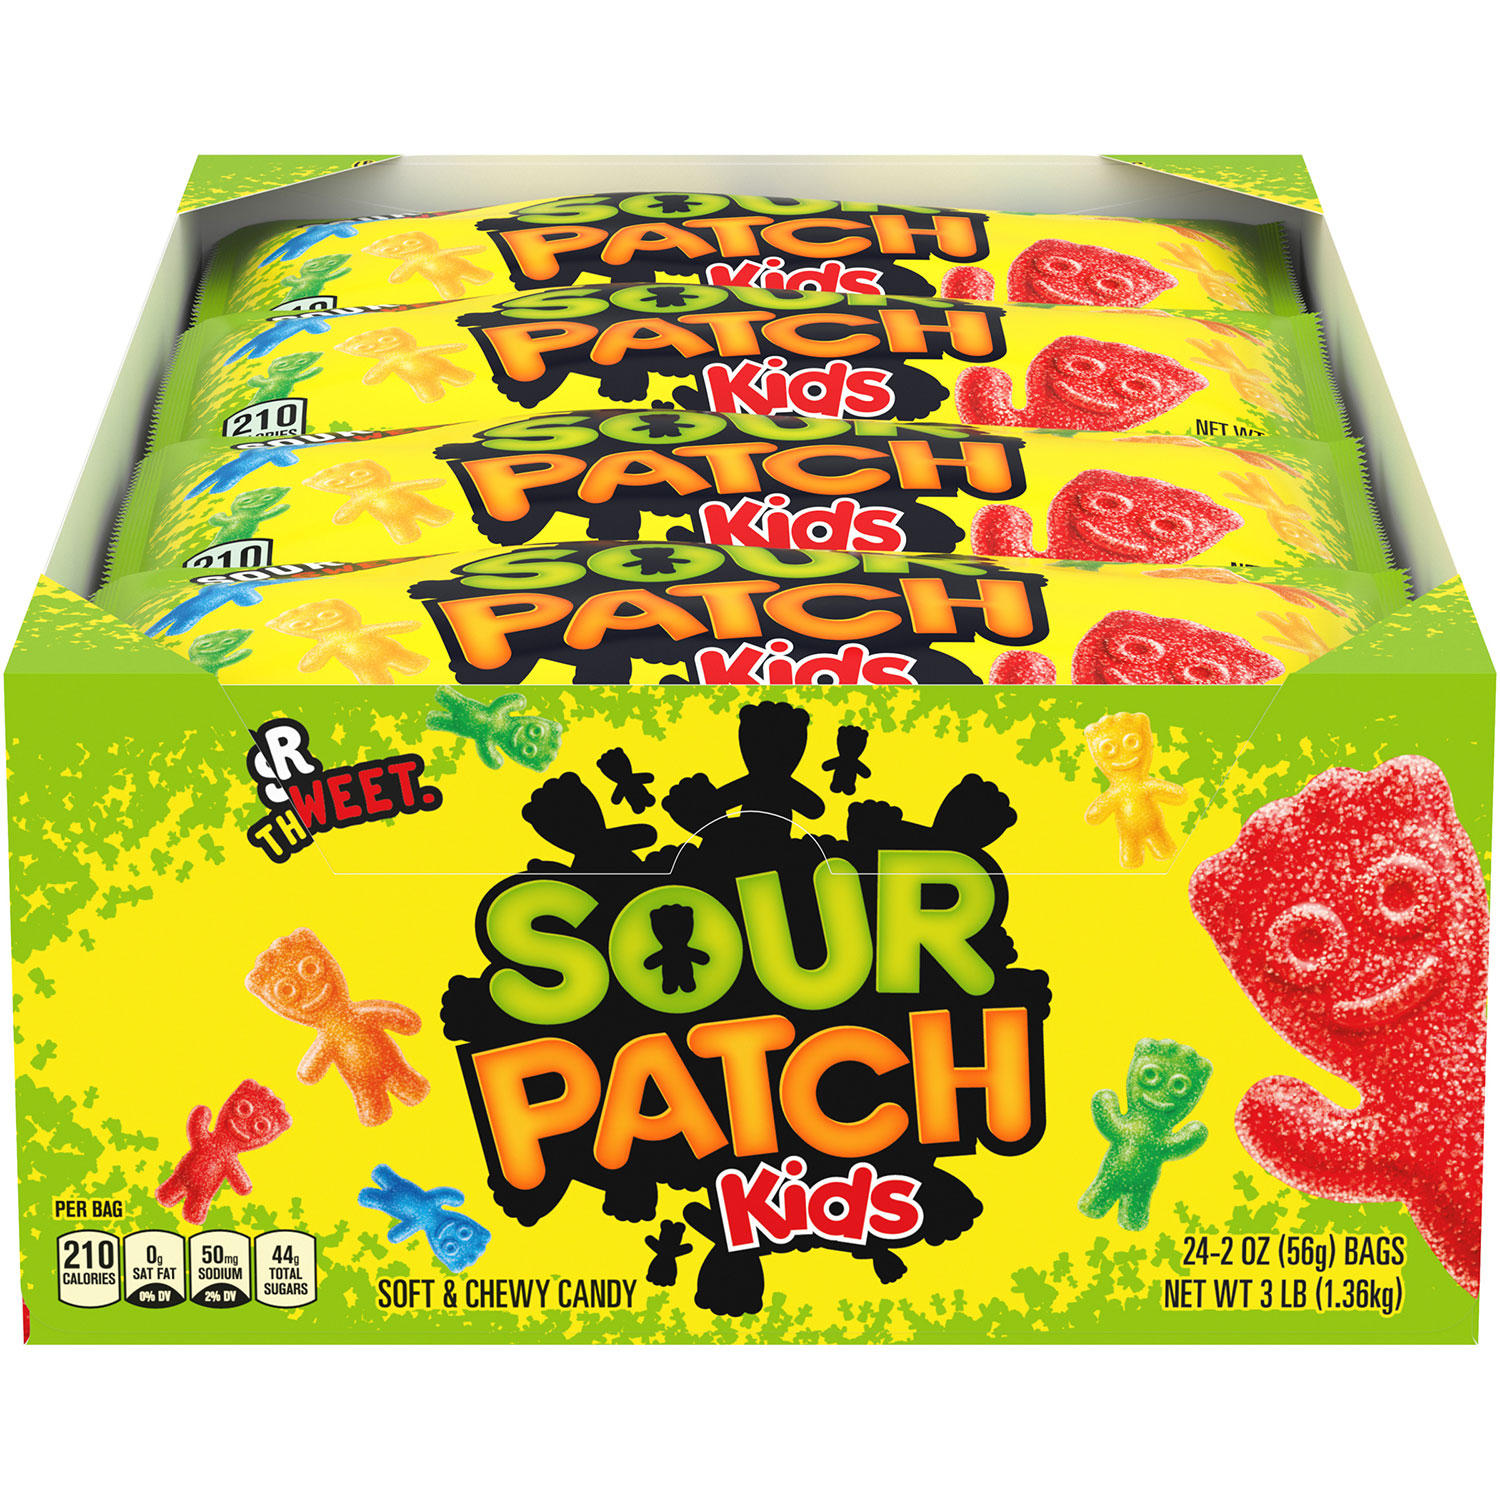 SOUR PATCH KIDS Soft & Chewy Candy (2 oz, 24 ct.)